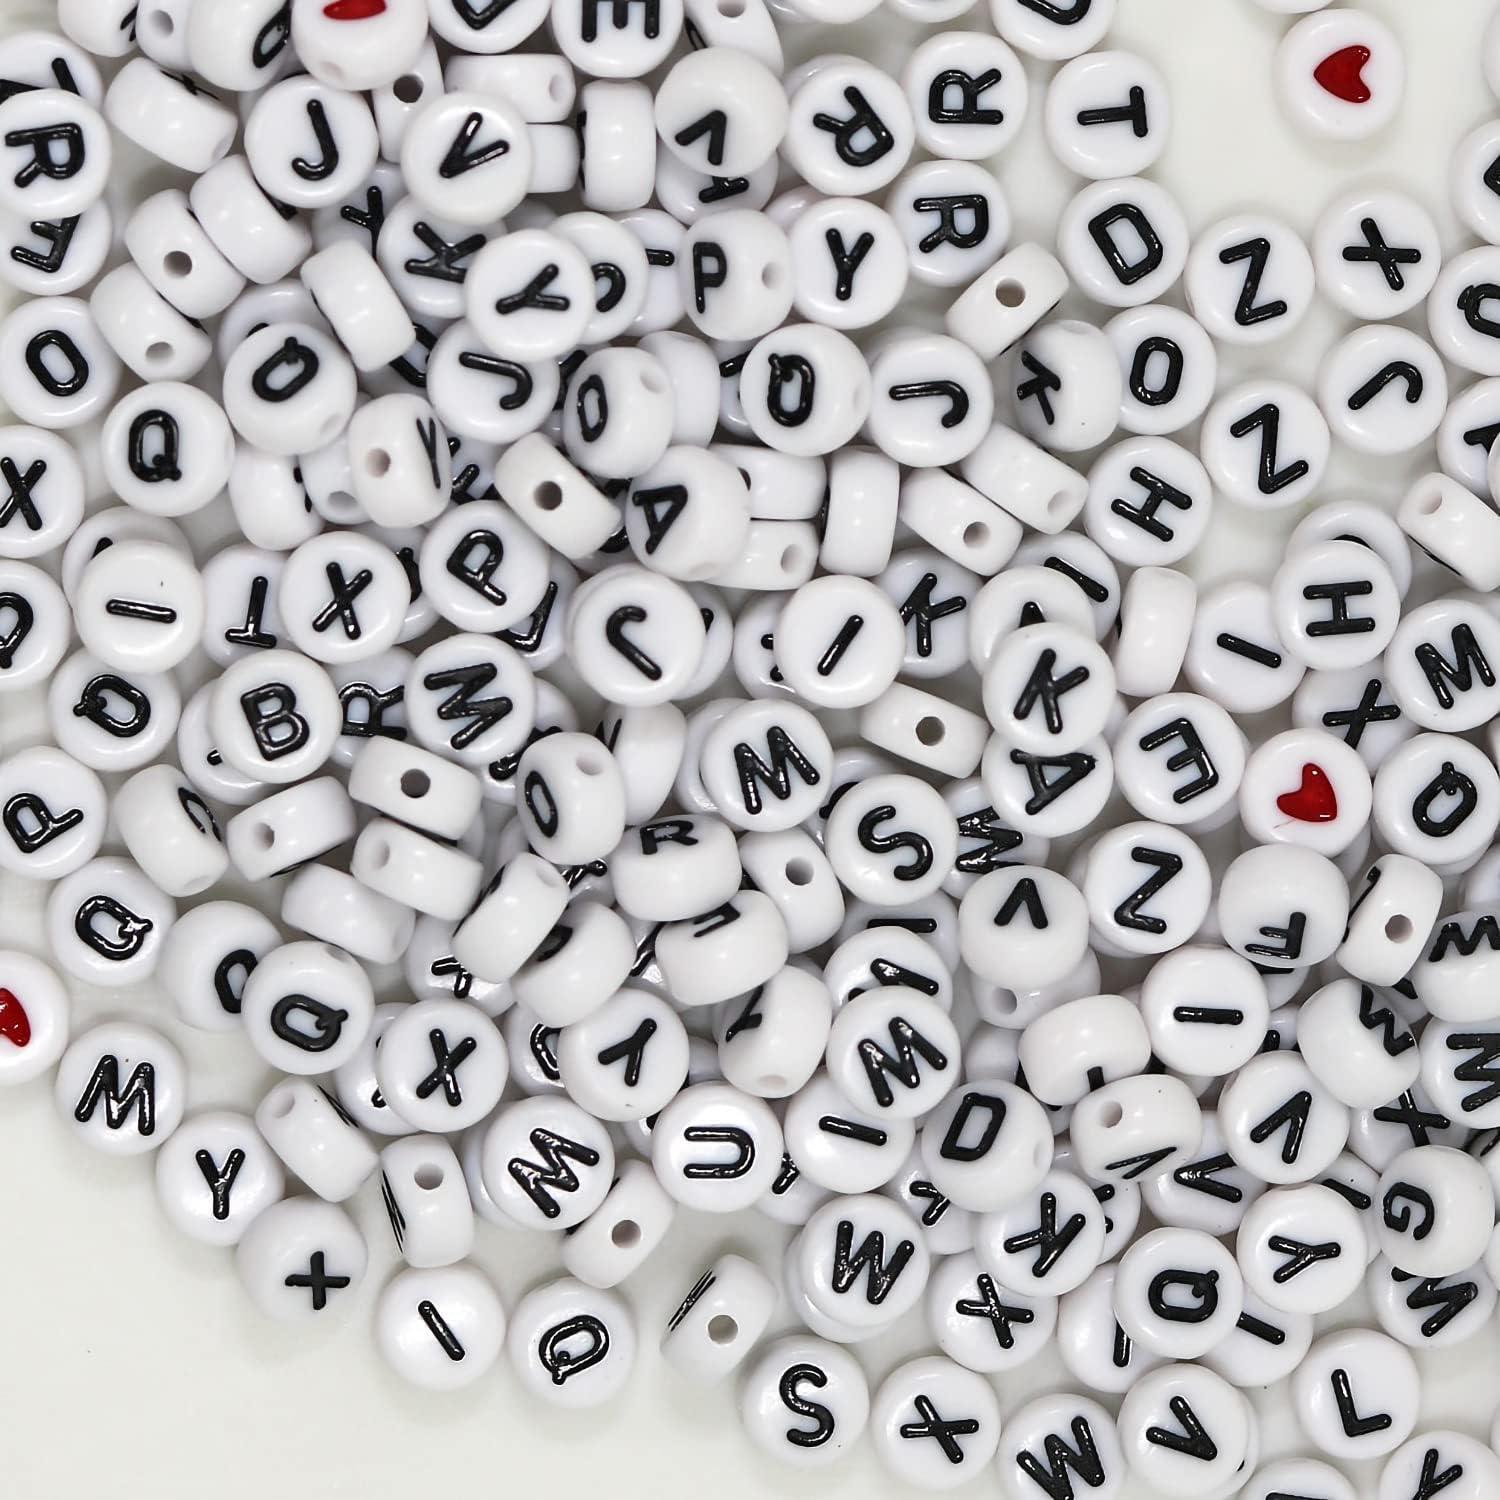 WangLaap 1450Pcs Letter Beads, Acrylic 4x7mm Round Letter Beads